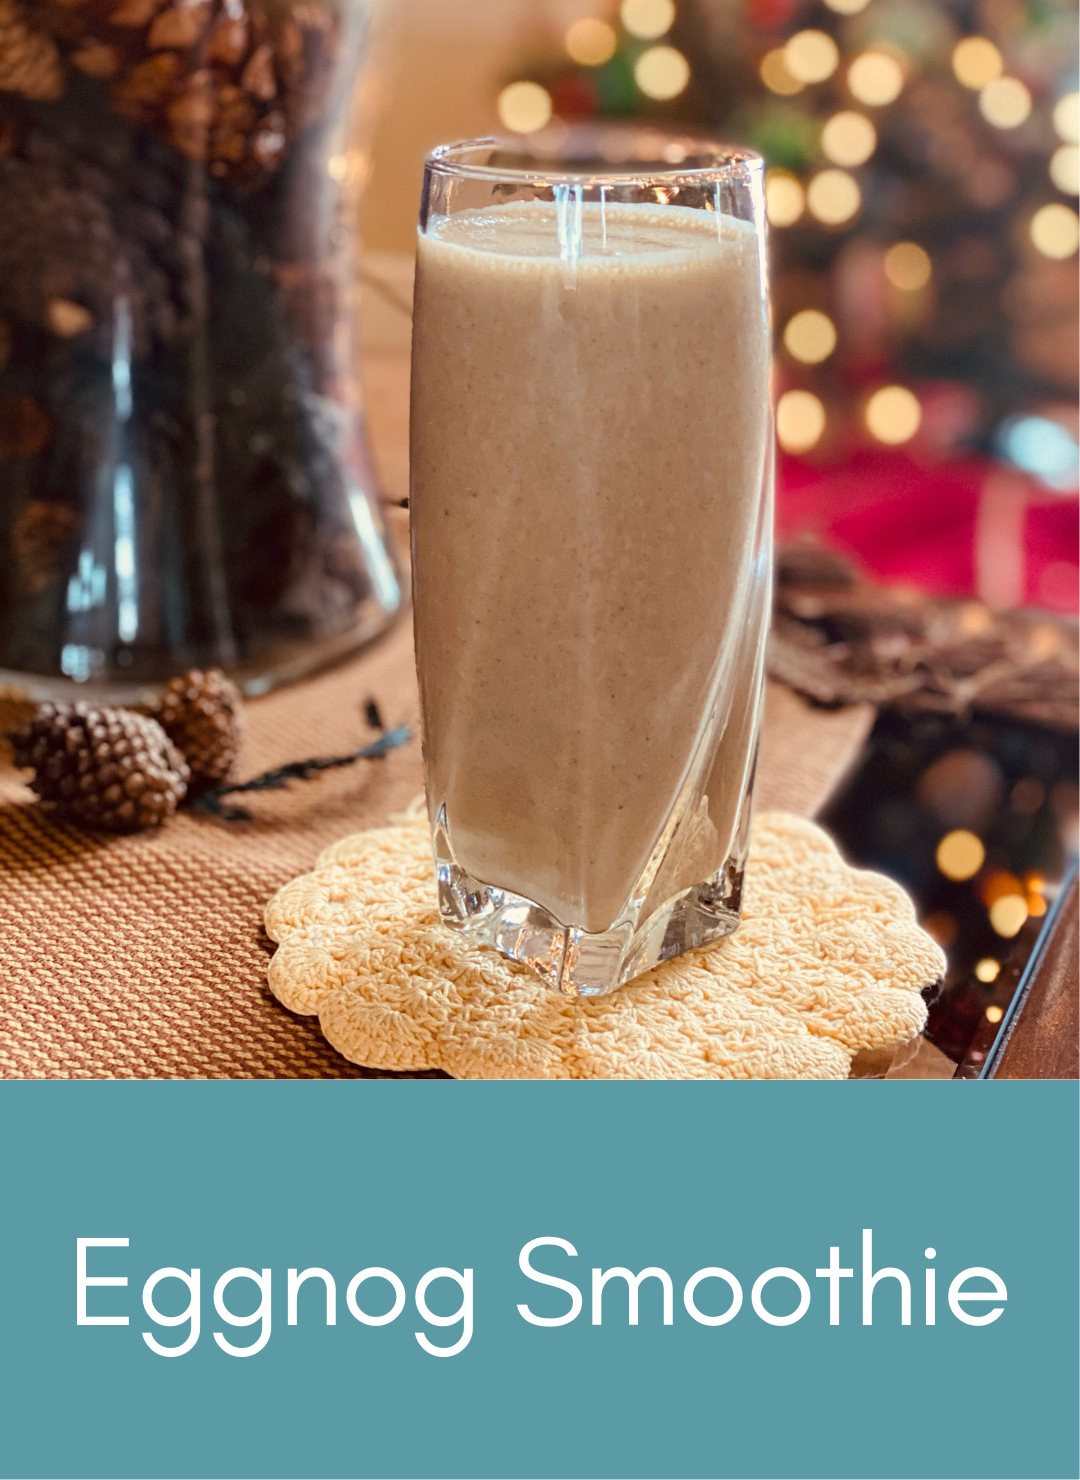 Whole food plant based eggnog smoothie Picture with link to recipe